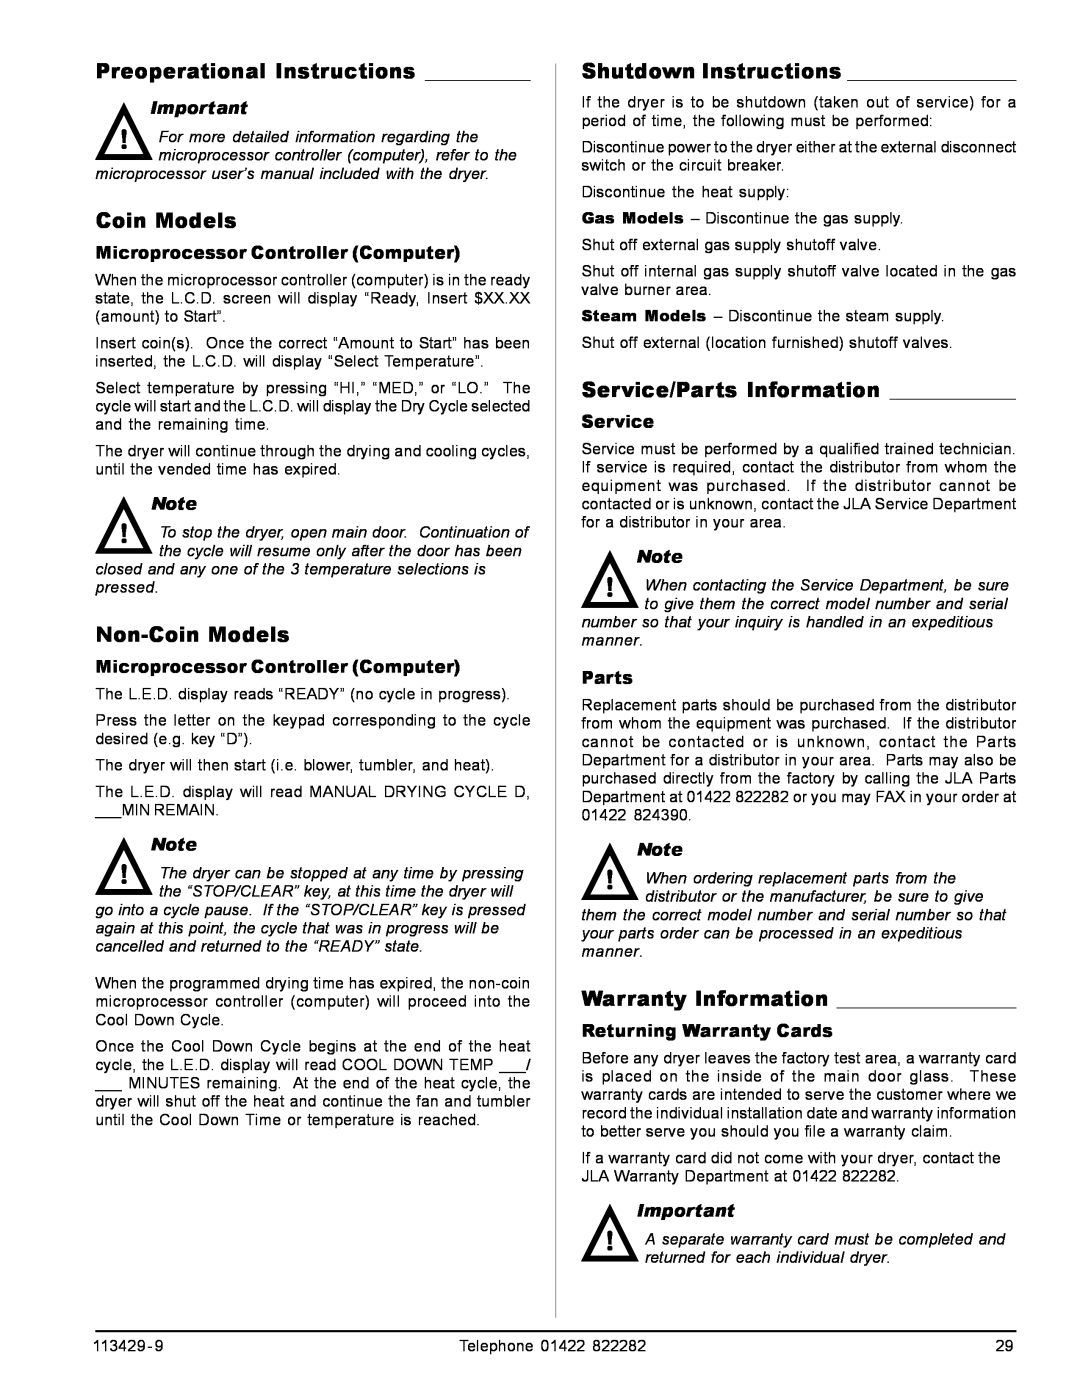 American Dryer Corp T30 Preoperational Instructions, Non-Coin Models, Shutdown Instructions, Service/Parts Information 